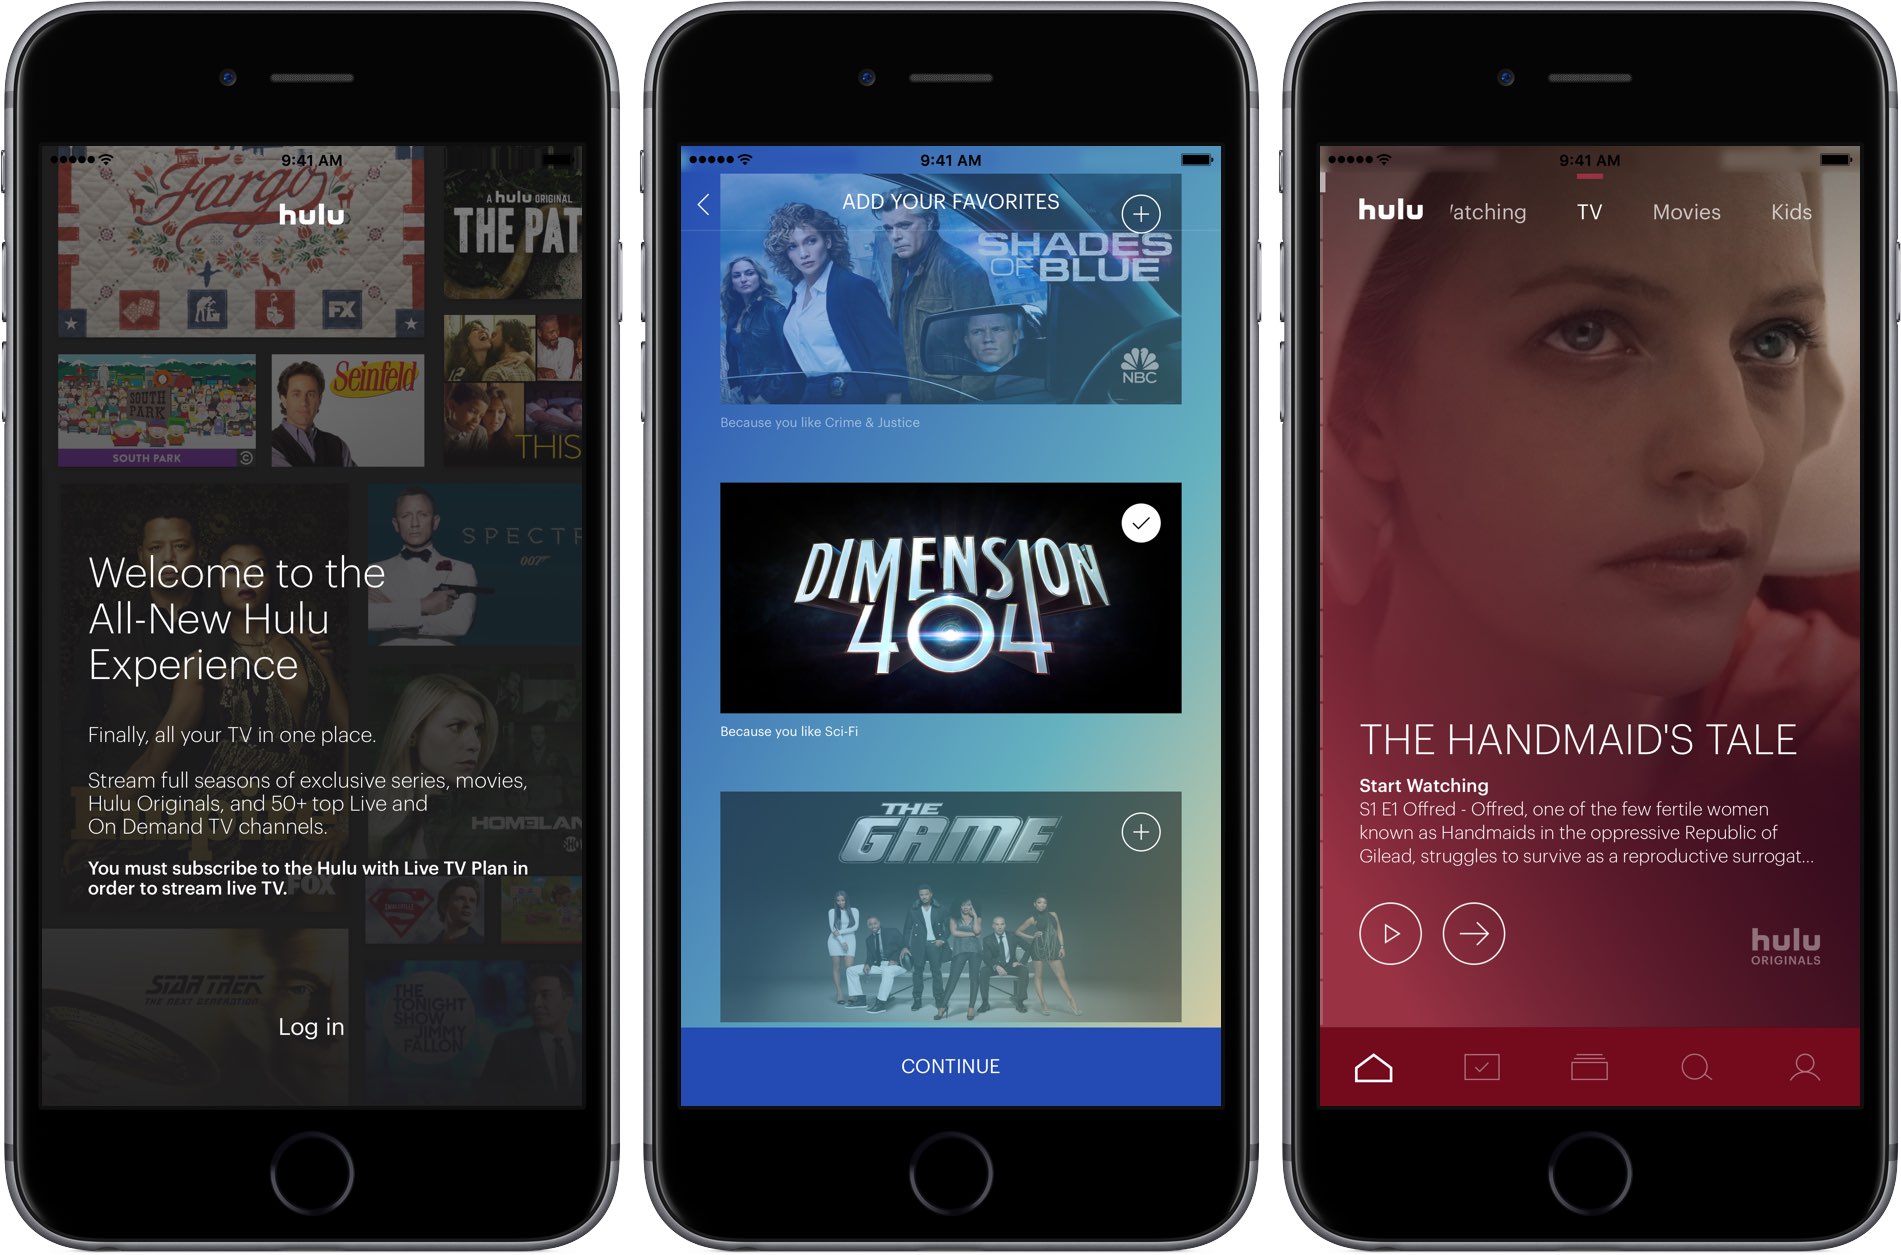 Hulu's $40 per month Live TV service launches, app hits App Store